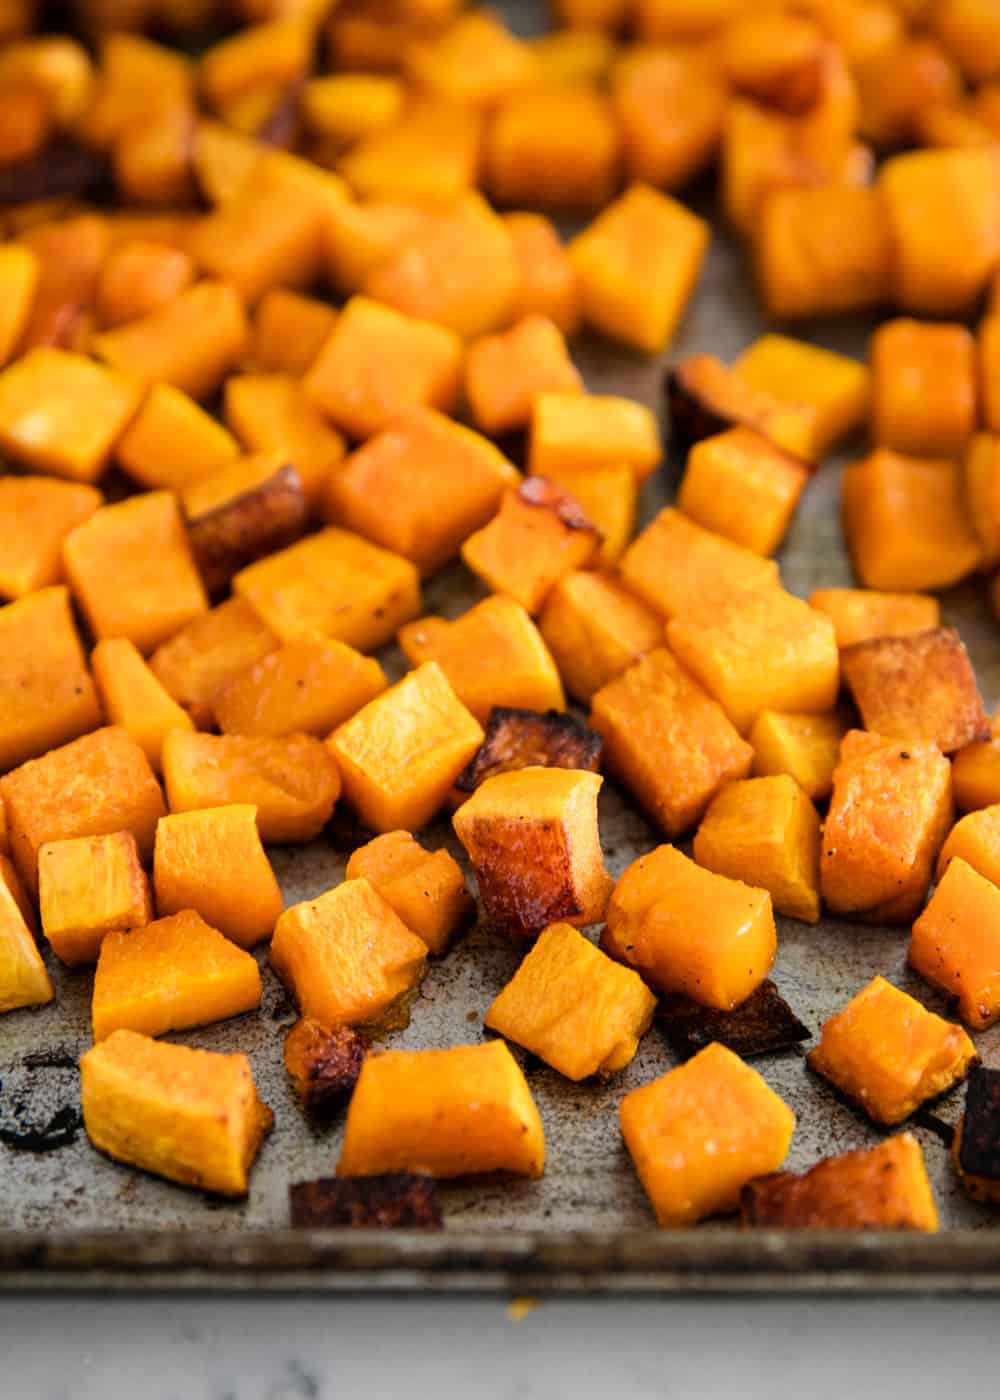 Oven roasted butternut squash on a baking sheet.